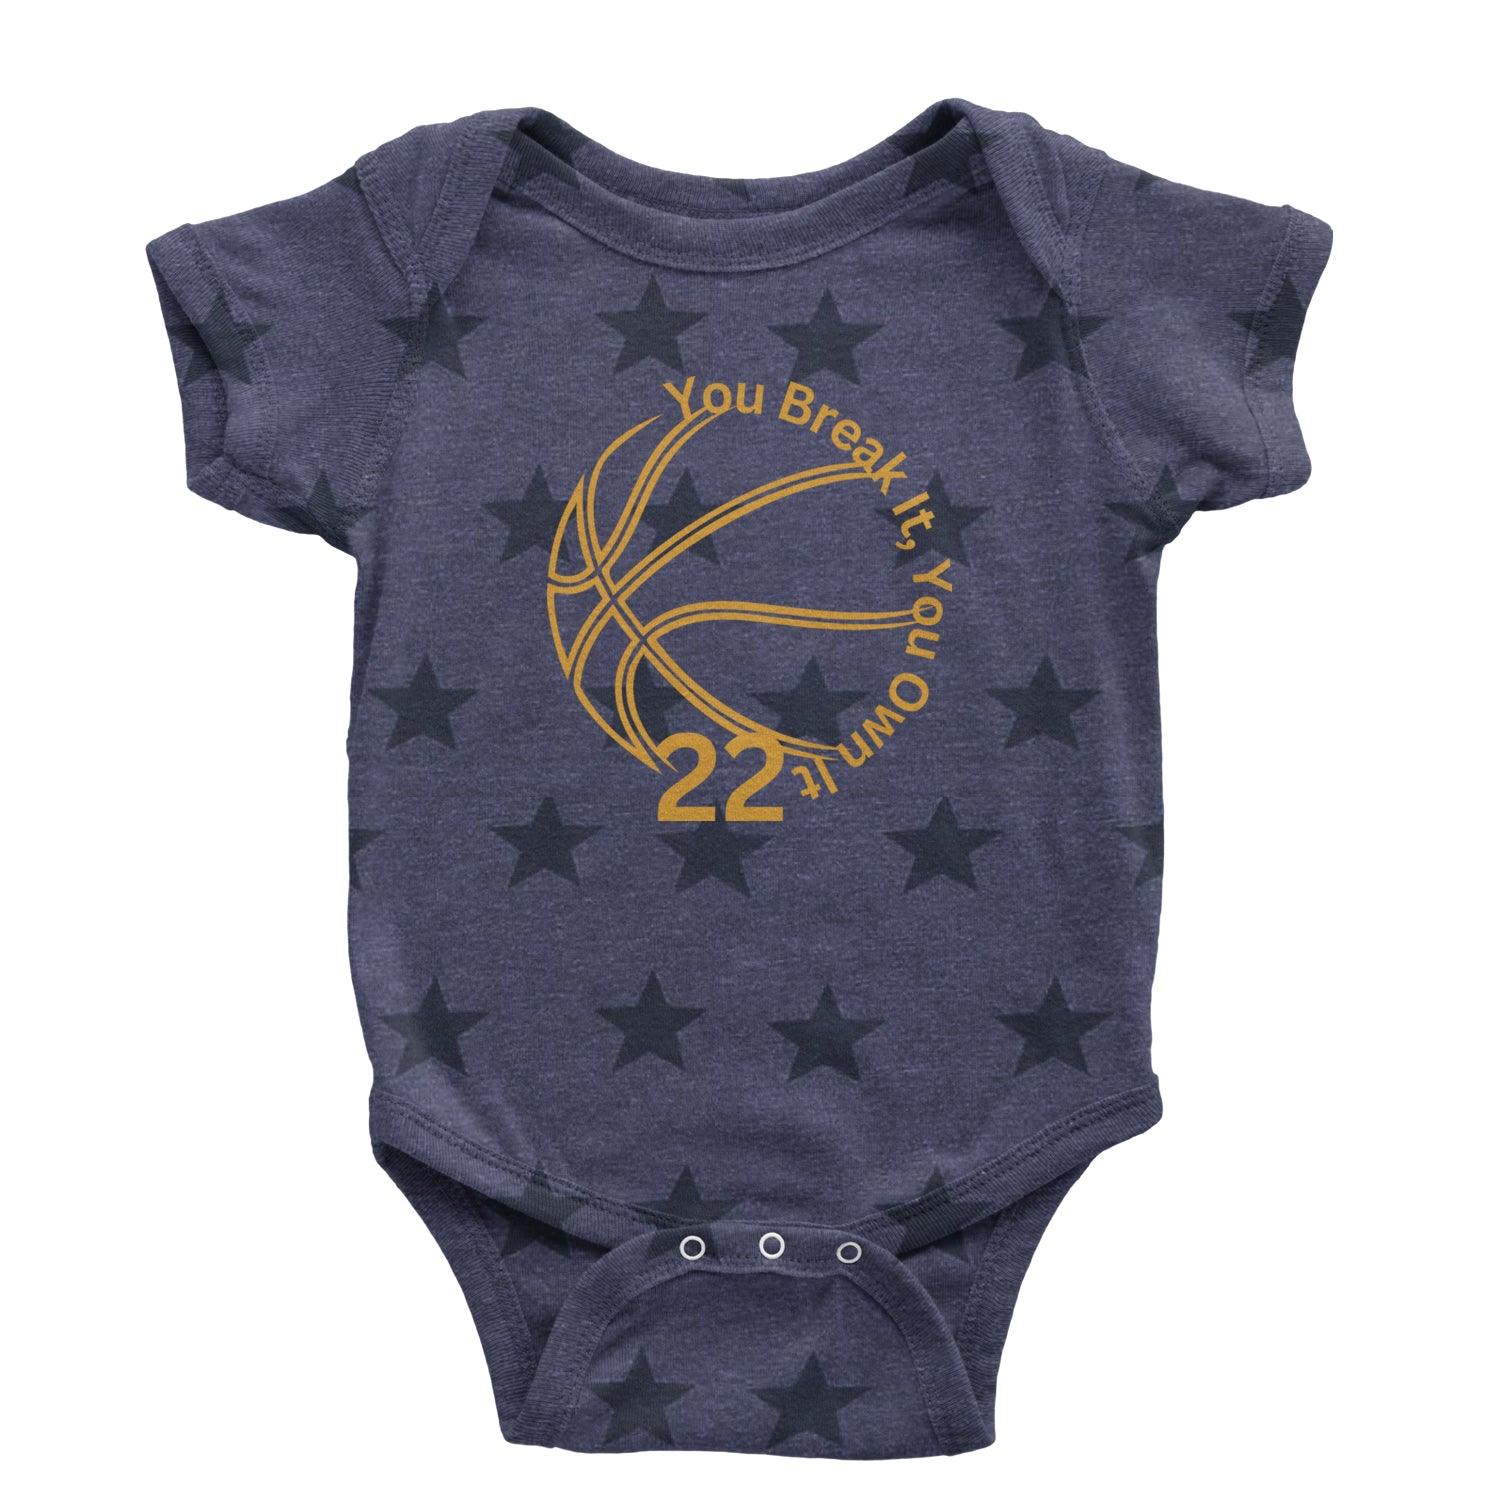 You Break It You Own It 22 Basketball Infant One-Piece Romper Bodysuit and Toddler T-shirt